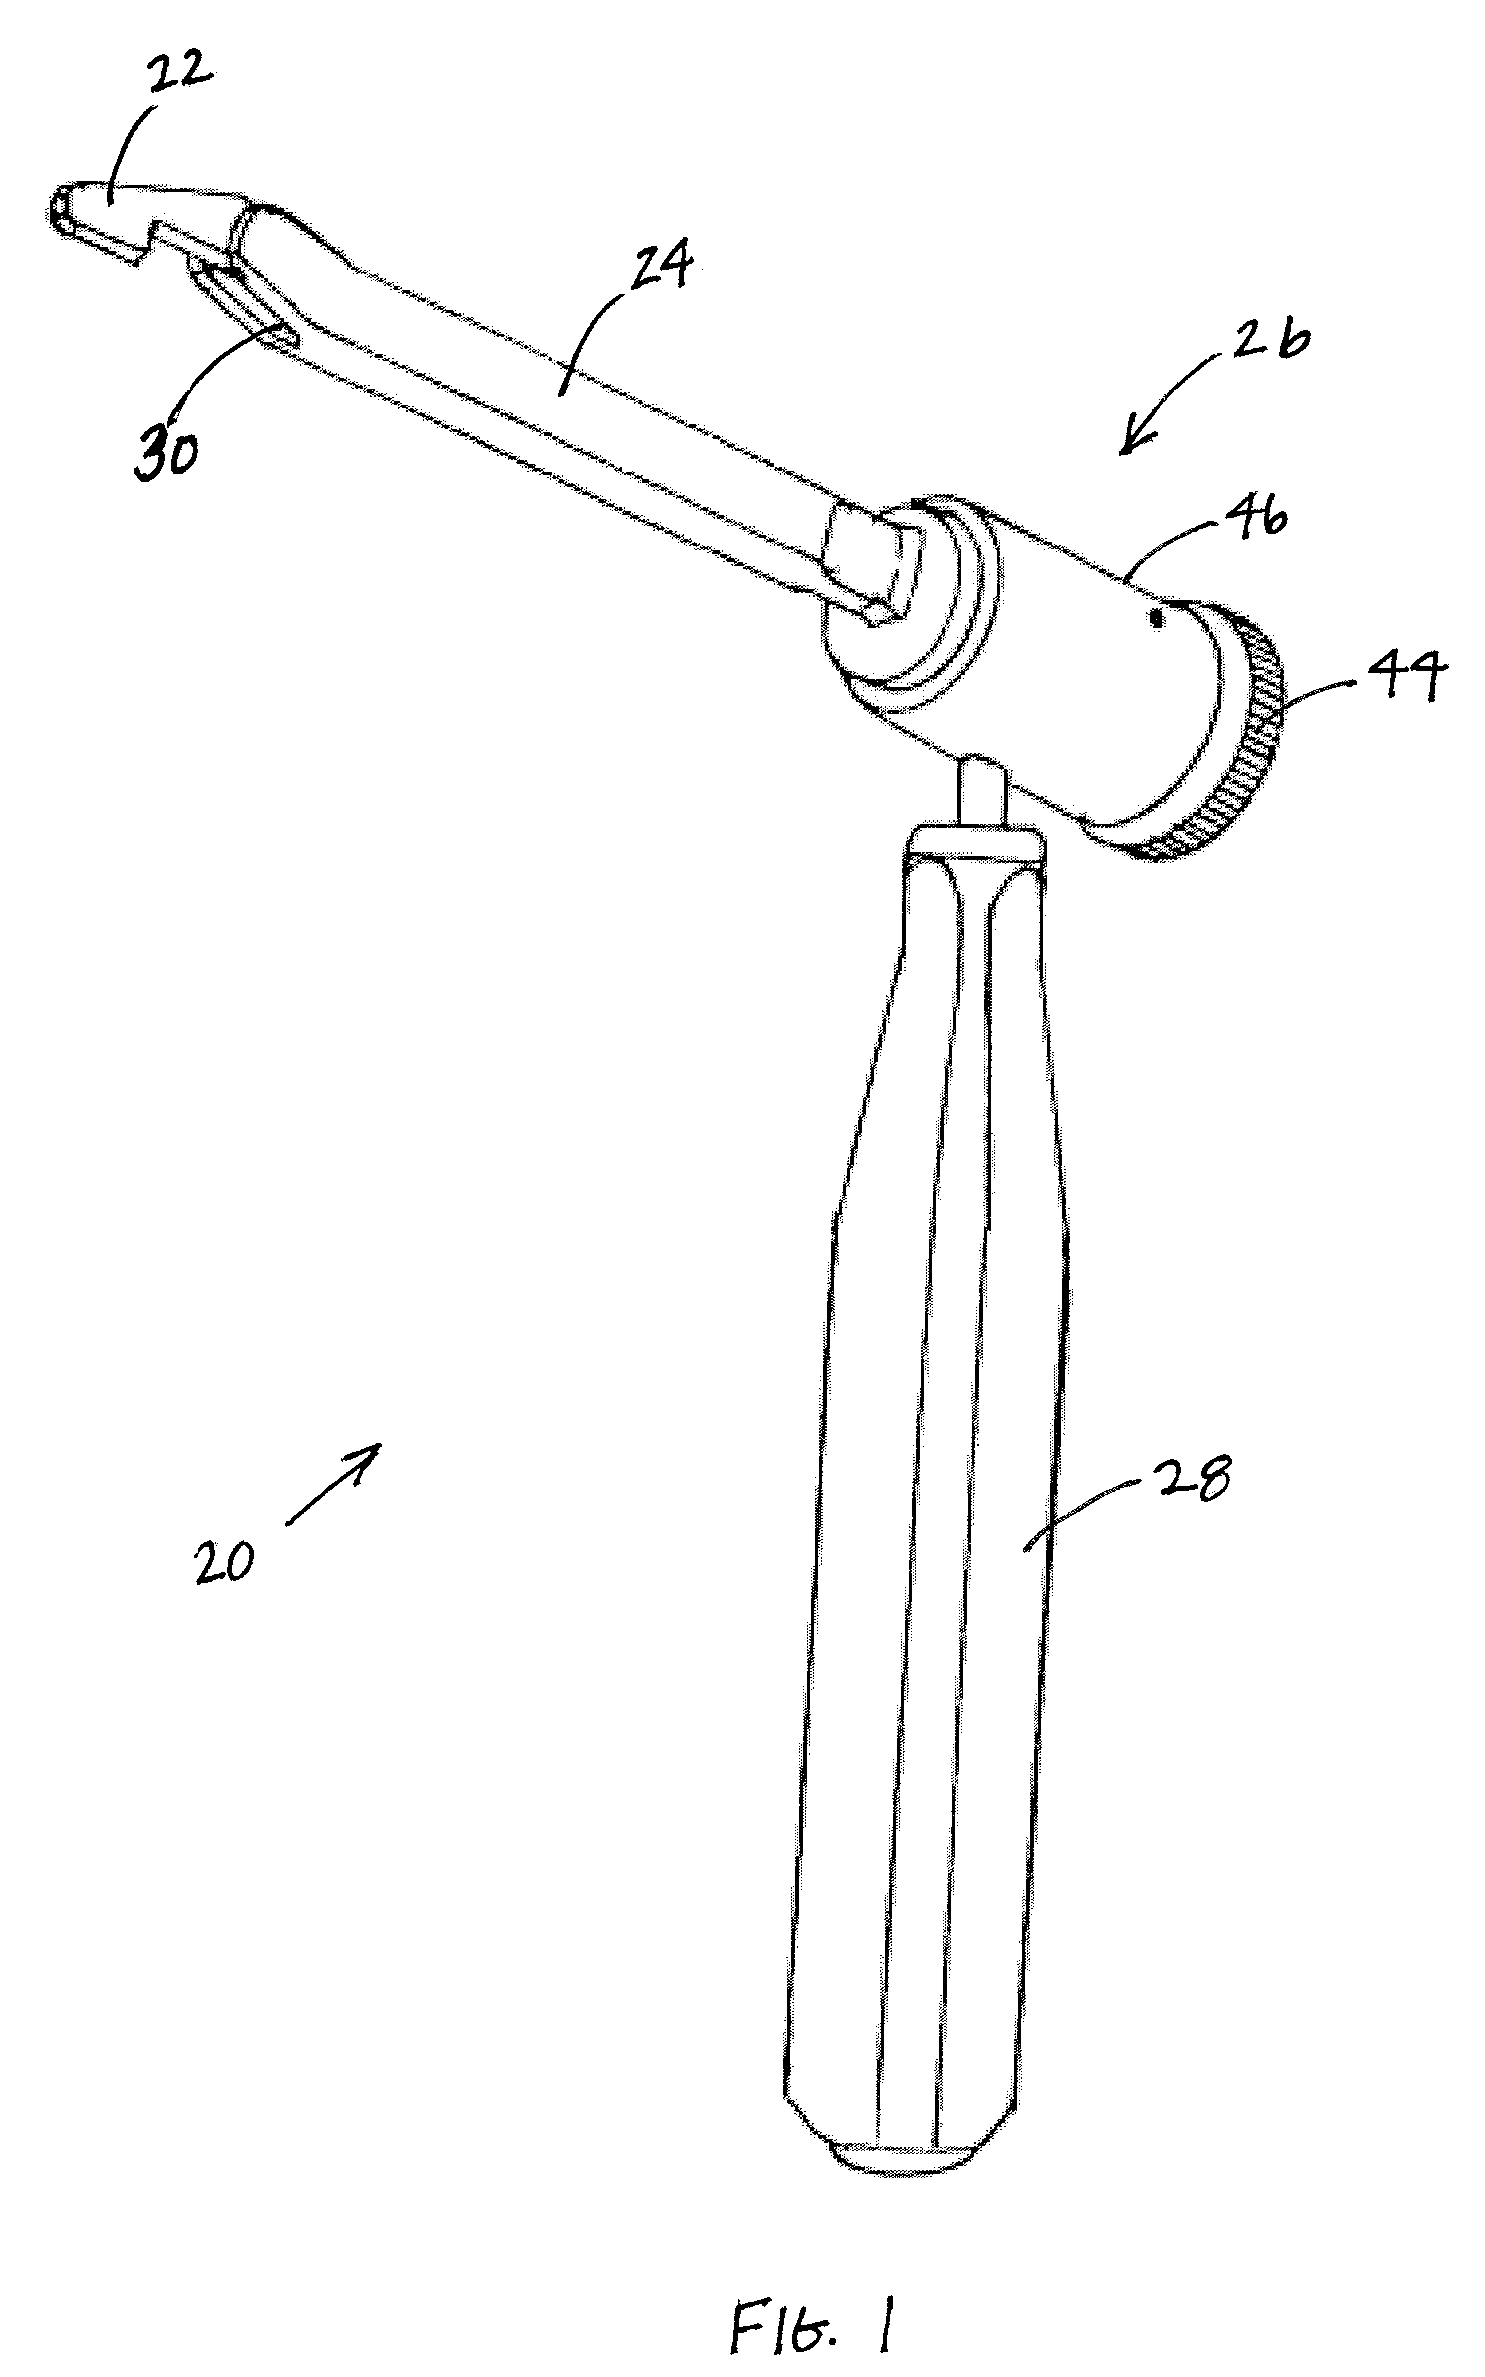 Surgical Drill For Providing Holes At An Angle